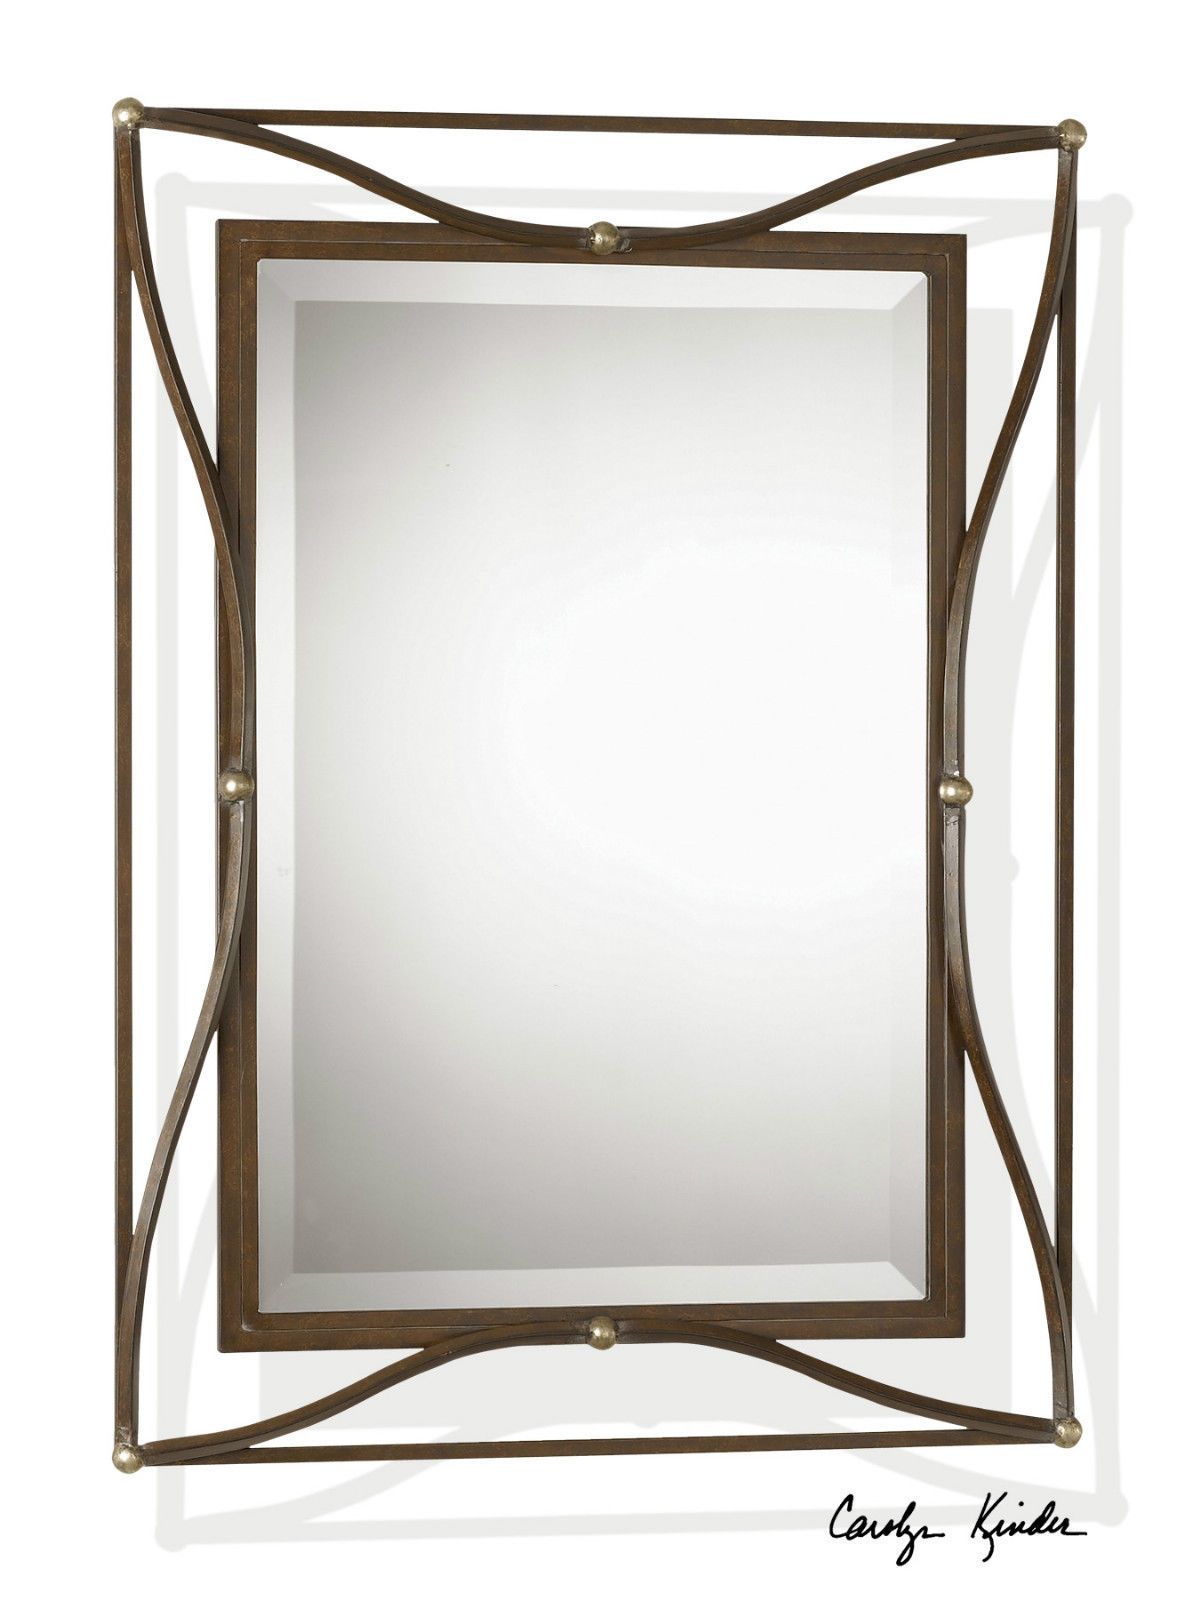 Two New 38" Aged Bronze Iron Rectangular Beveled Wall Mirror Western Pertaining To Western Wall Mirrors (View 9 of 15)